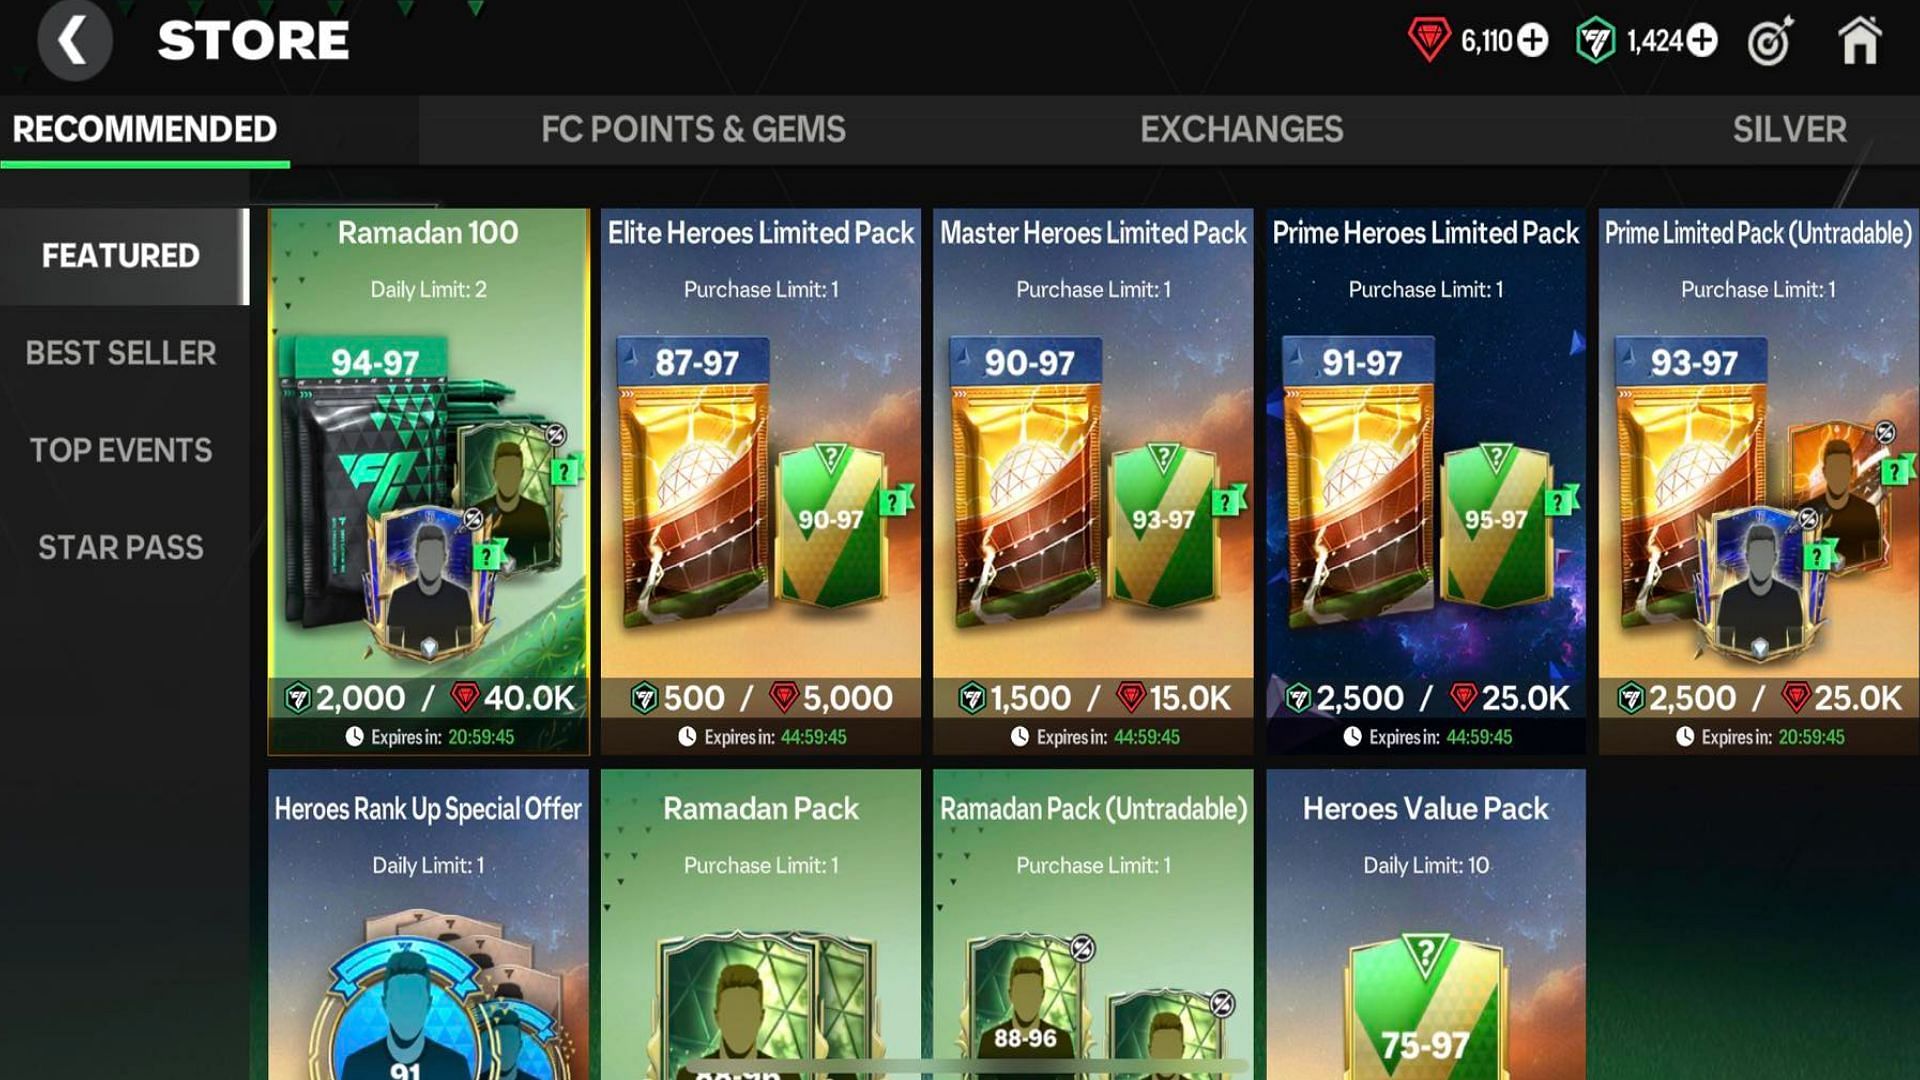 EA Sports has added various Ramadan packs in the Store (Image via EA Sports)